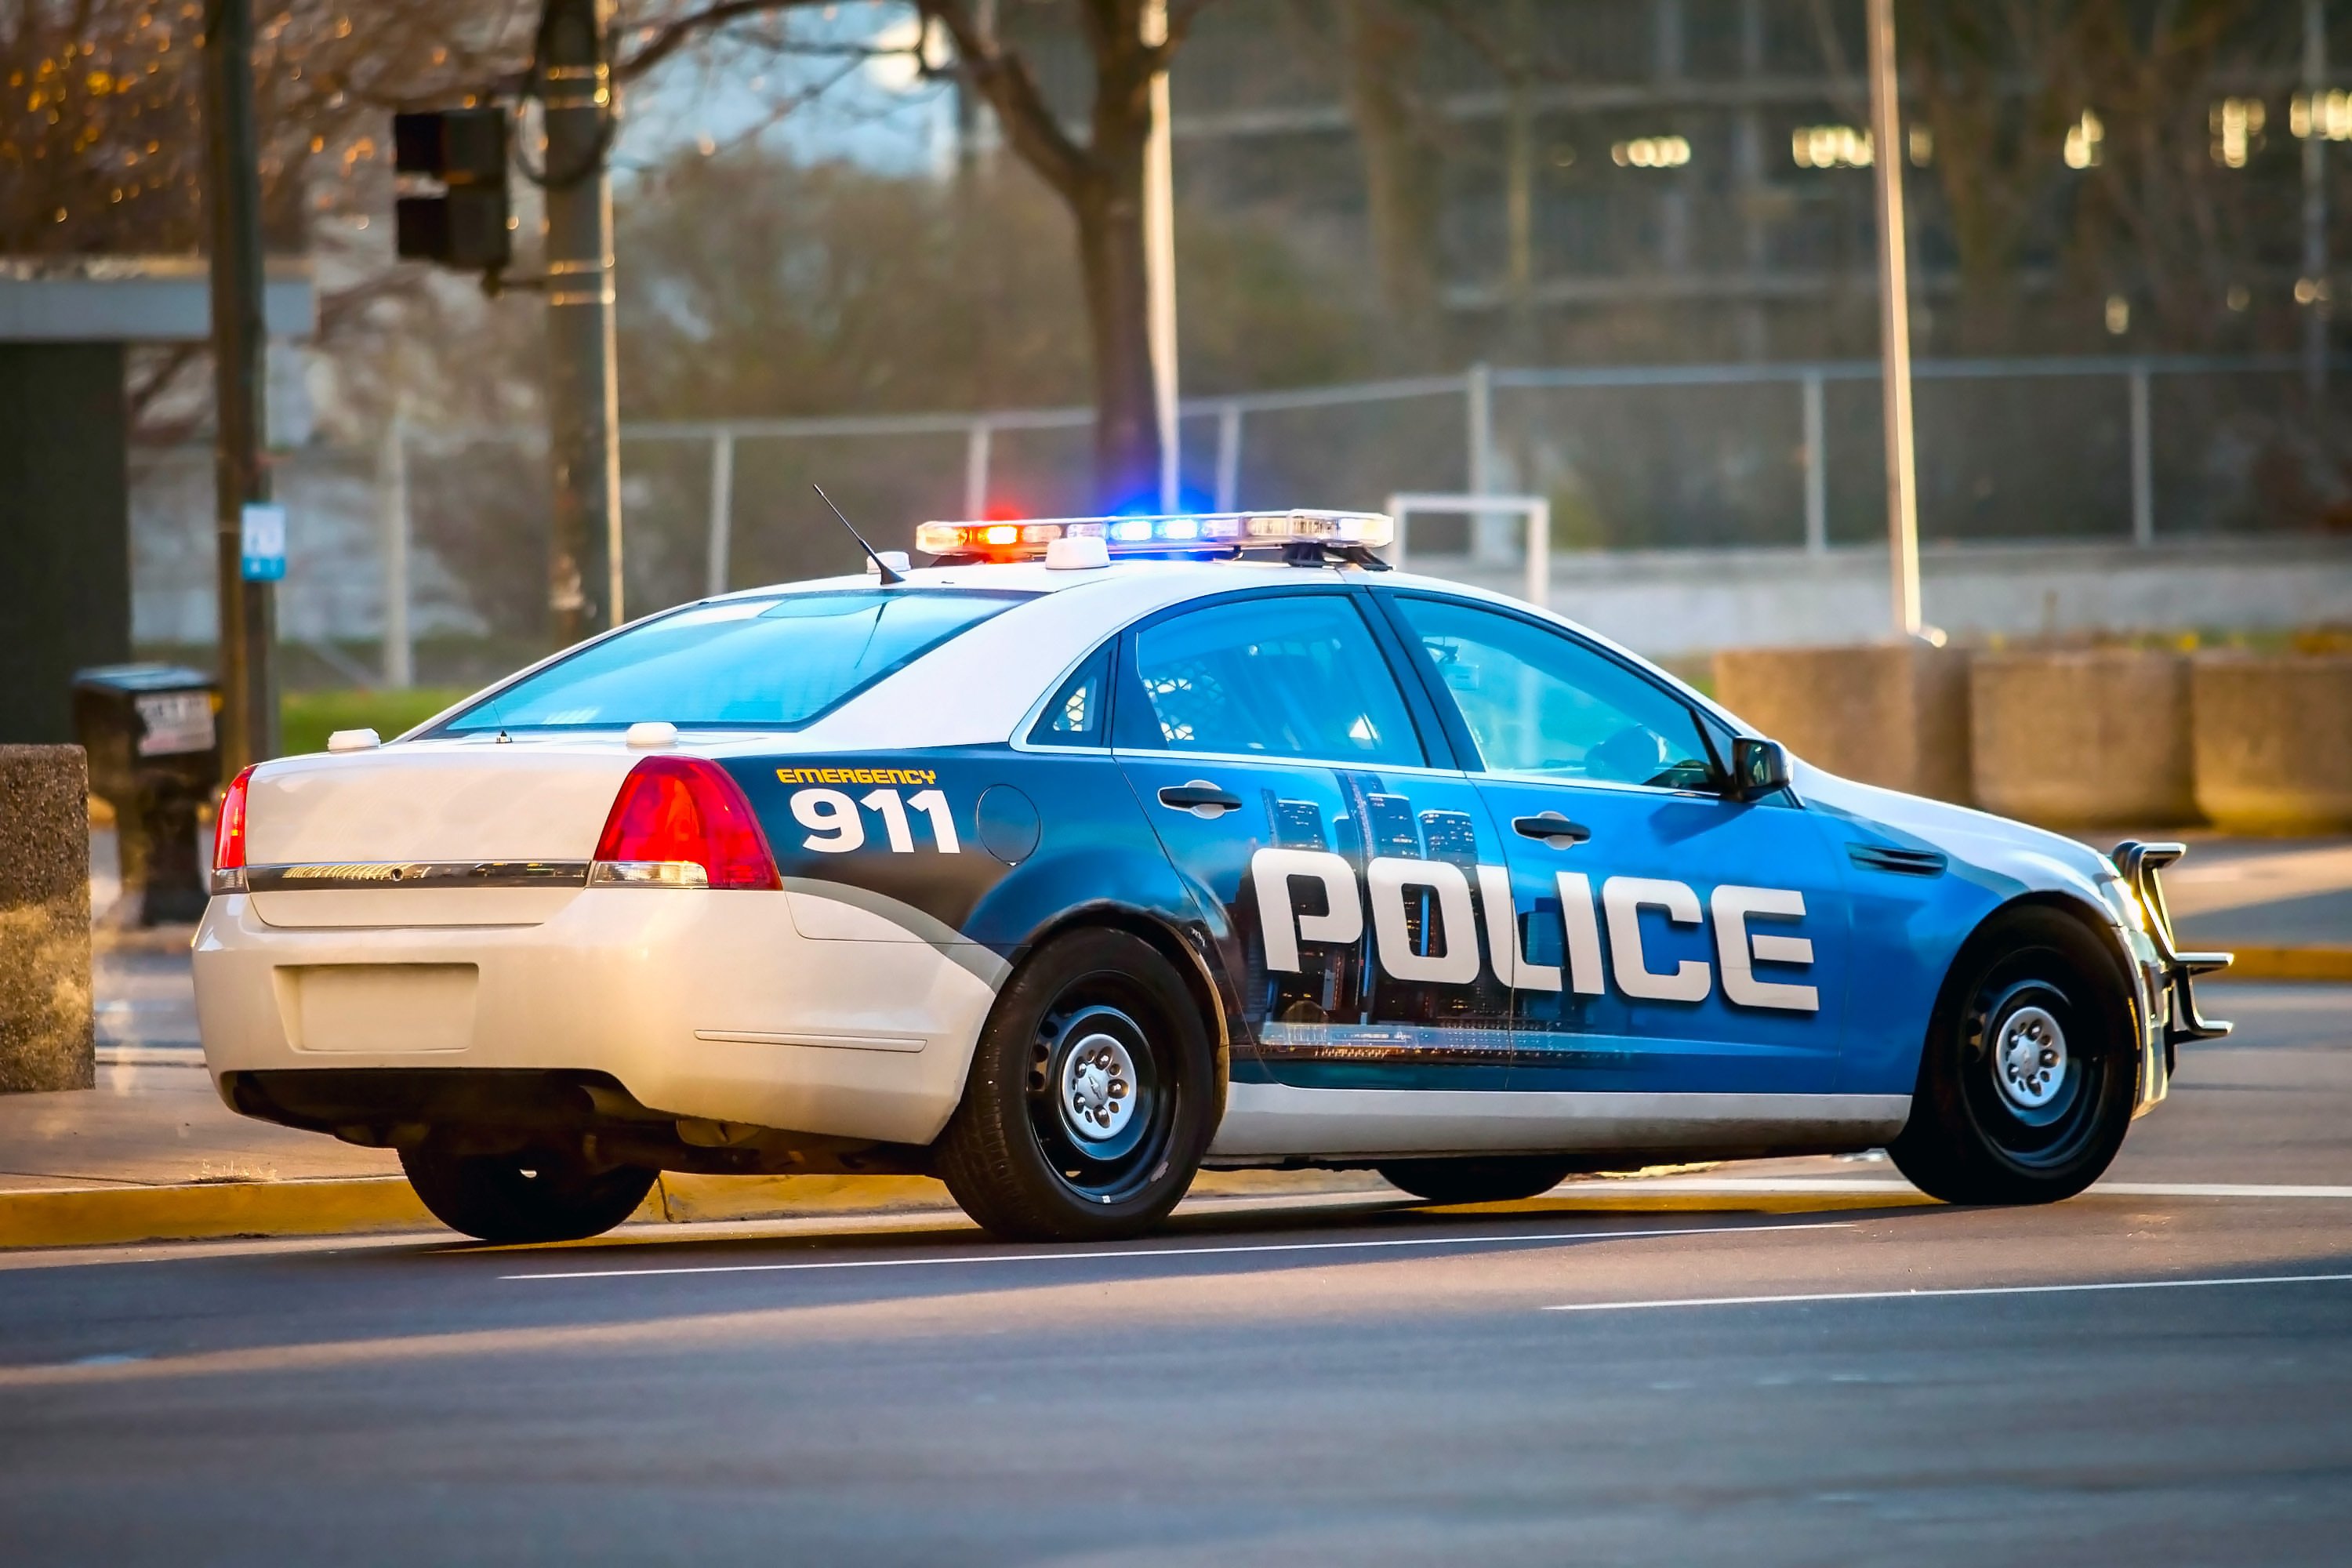 A police vehicle driving down a street. | Photo: Shutterstock